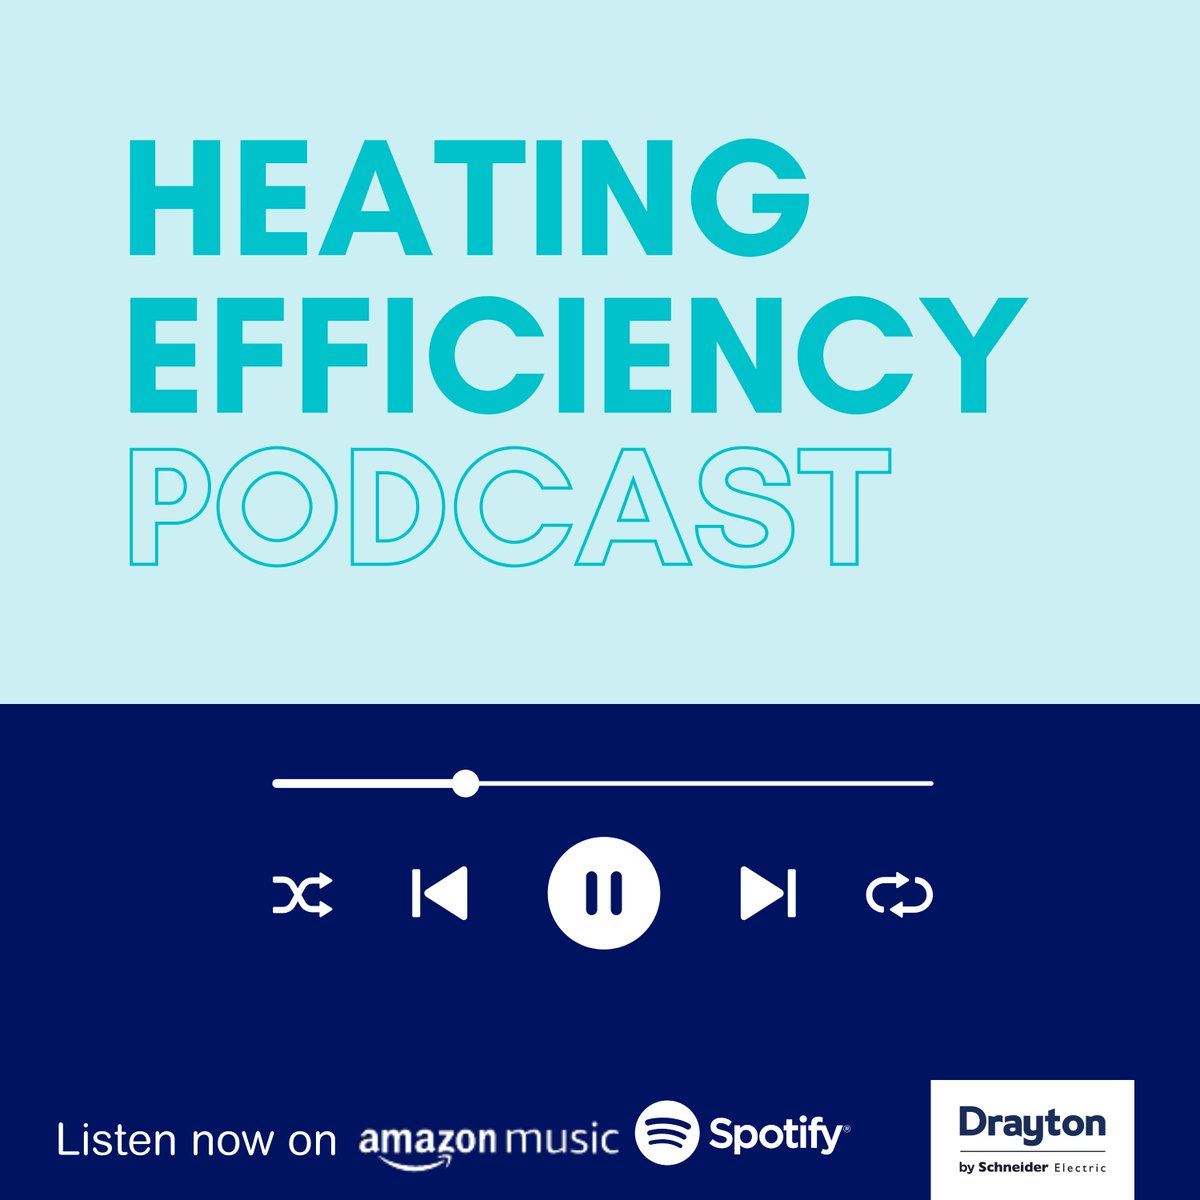 On this month's Heating Efficiency podcast, our expert panel discuss heating efficiency and monitoring. …ncy-podcast-by-drayton.simplecast.com/episodes/heat-… With @RichMWPHS, @HeatingAcademy, @TrystanLea, @Damon_BPHR)and @Zarch1972 #boilers #pumps #efficiency #plumbing #heating #podcast